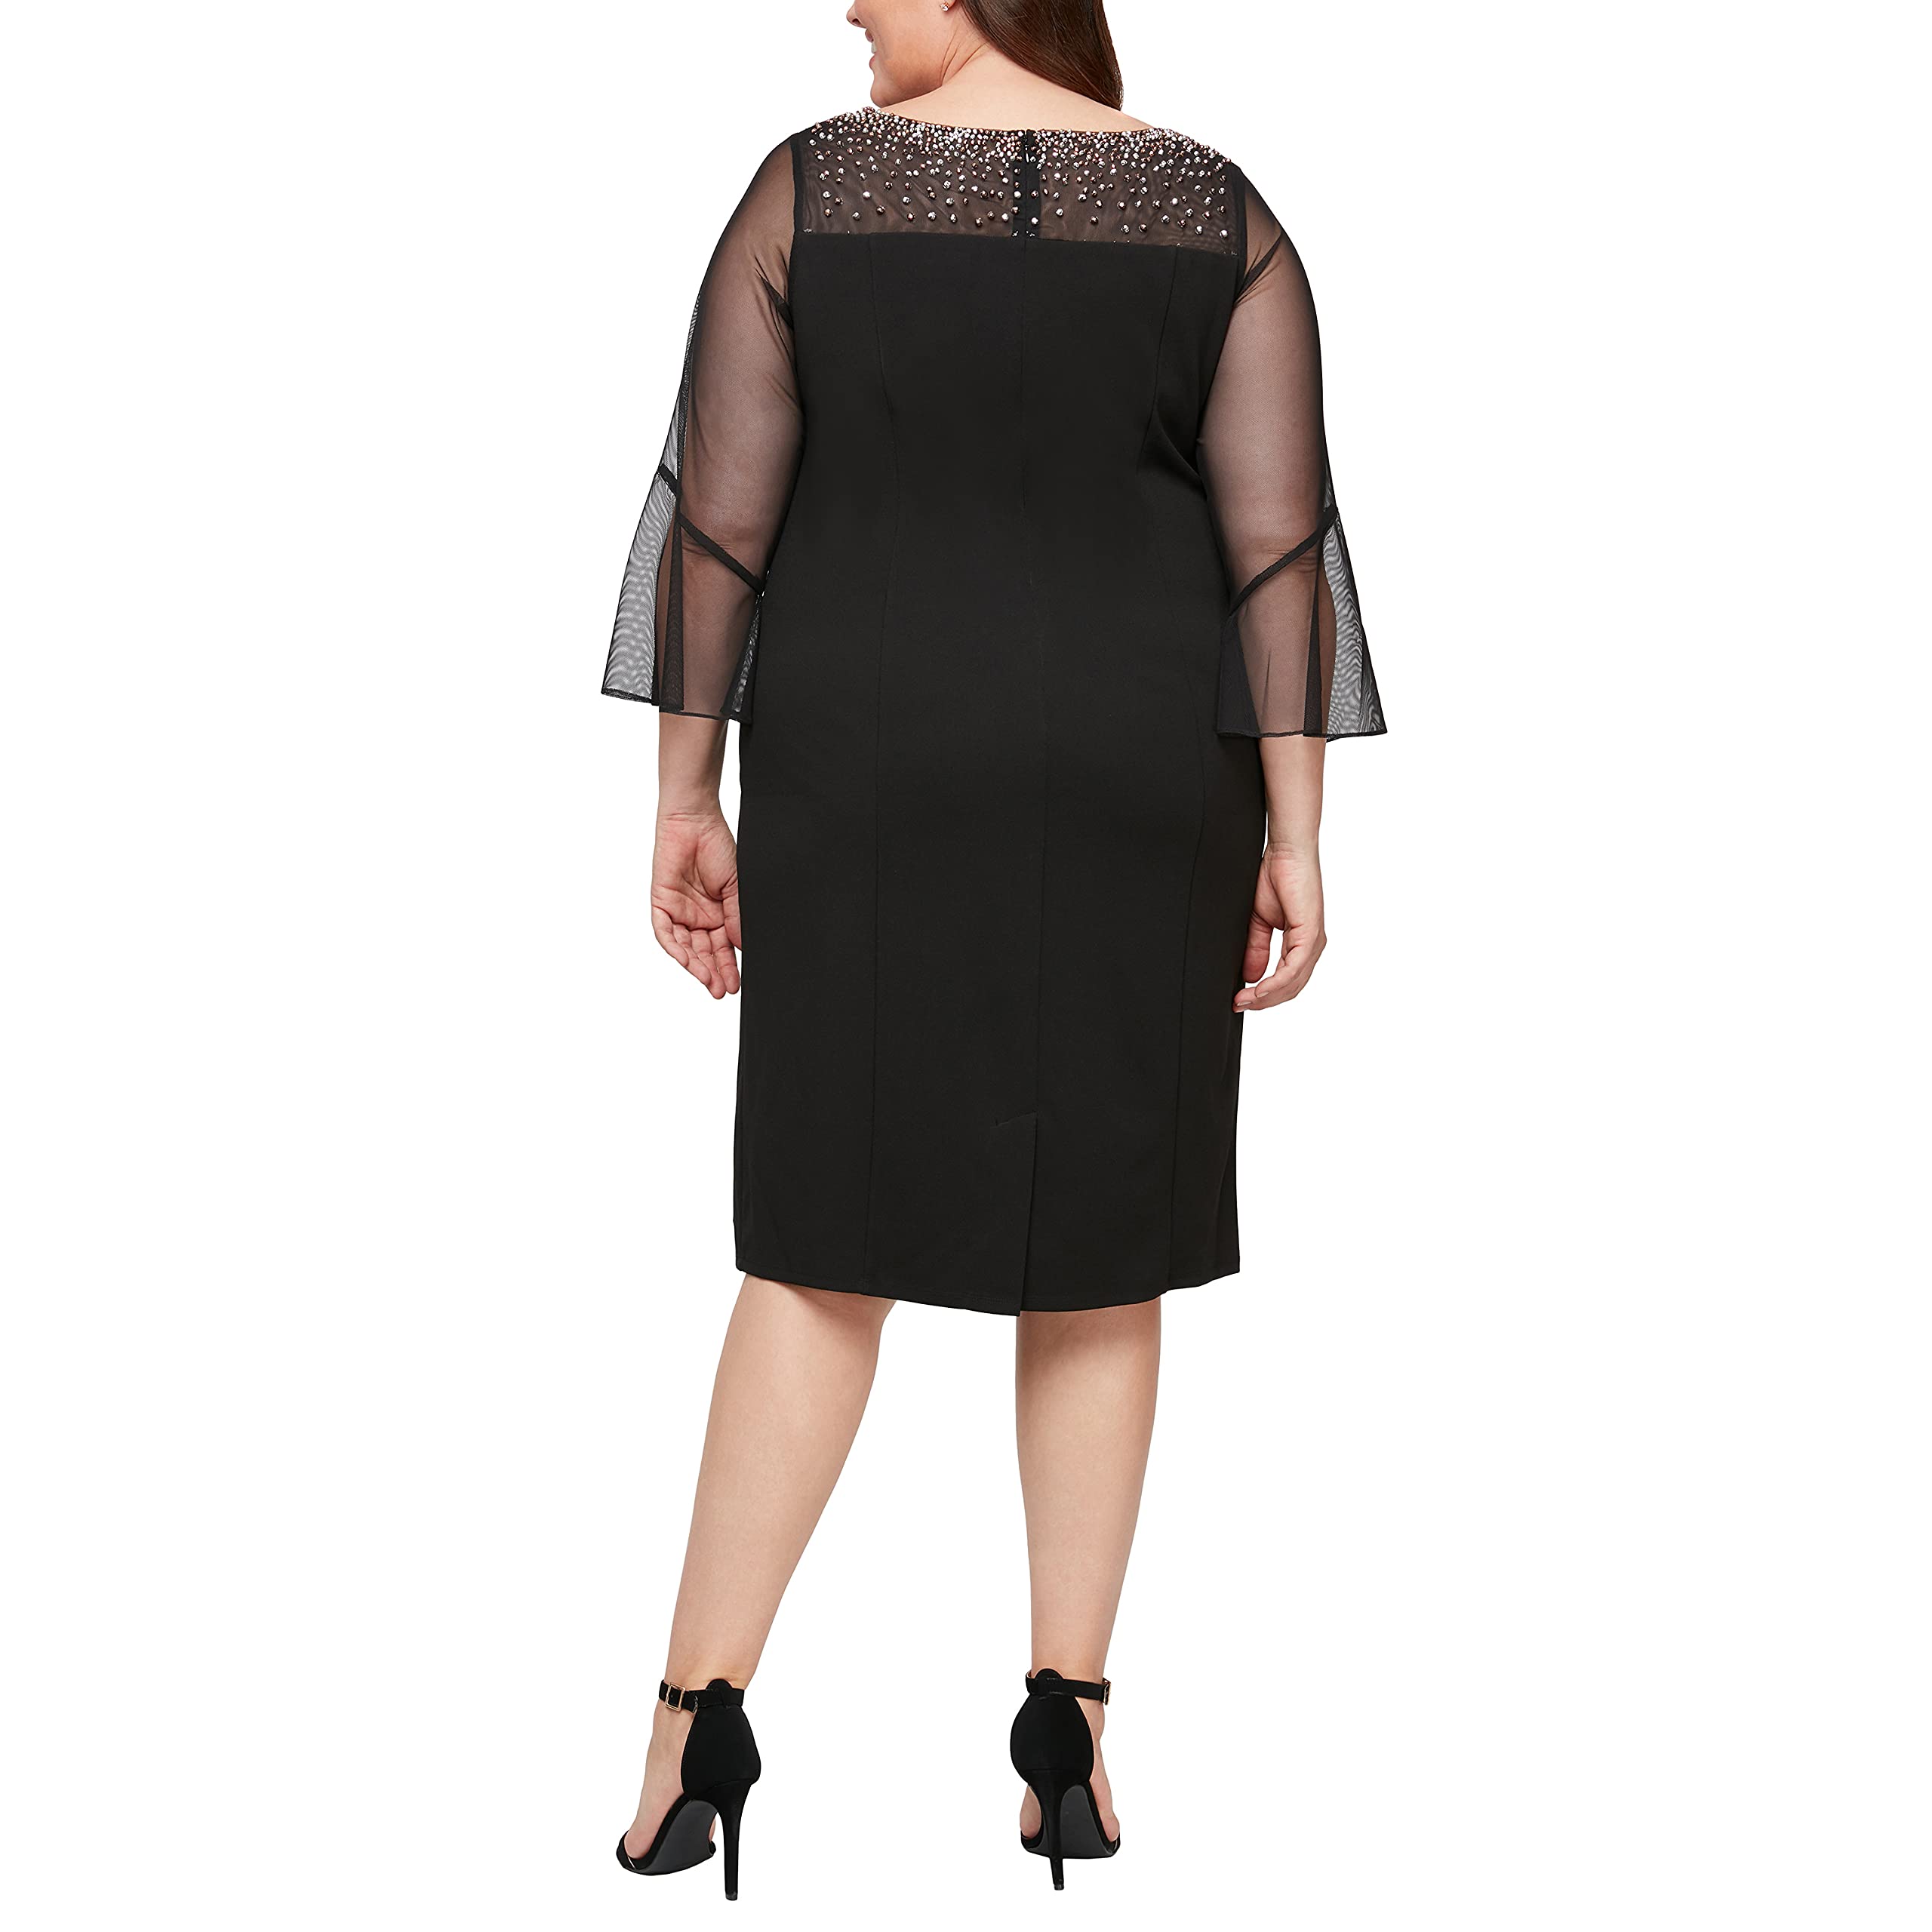 Alex Evenings Women's Plus Size Short Shift Dress with Embellished Illusion Detail